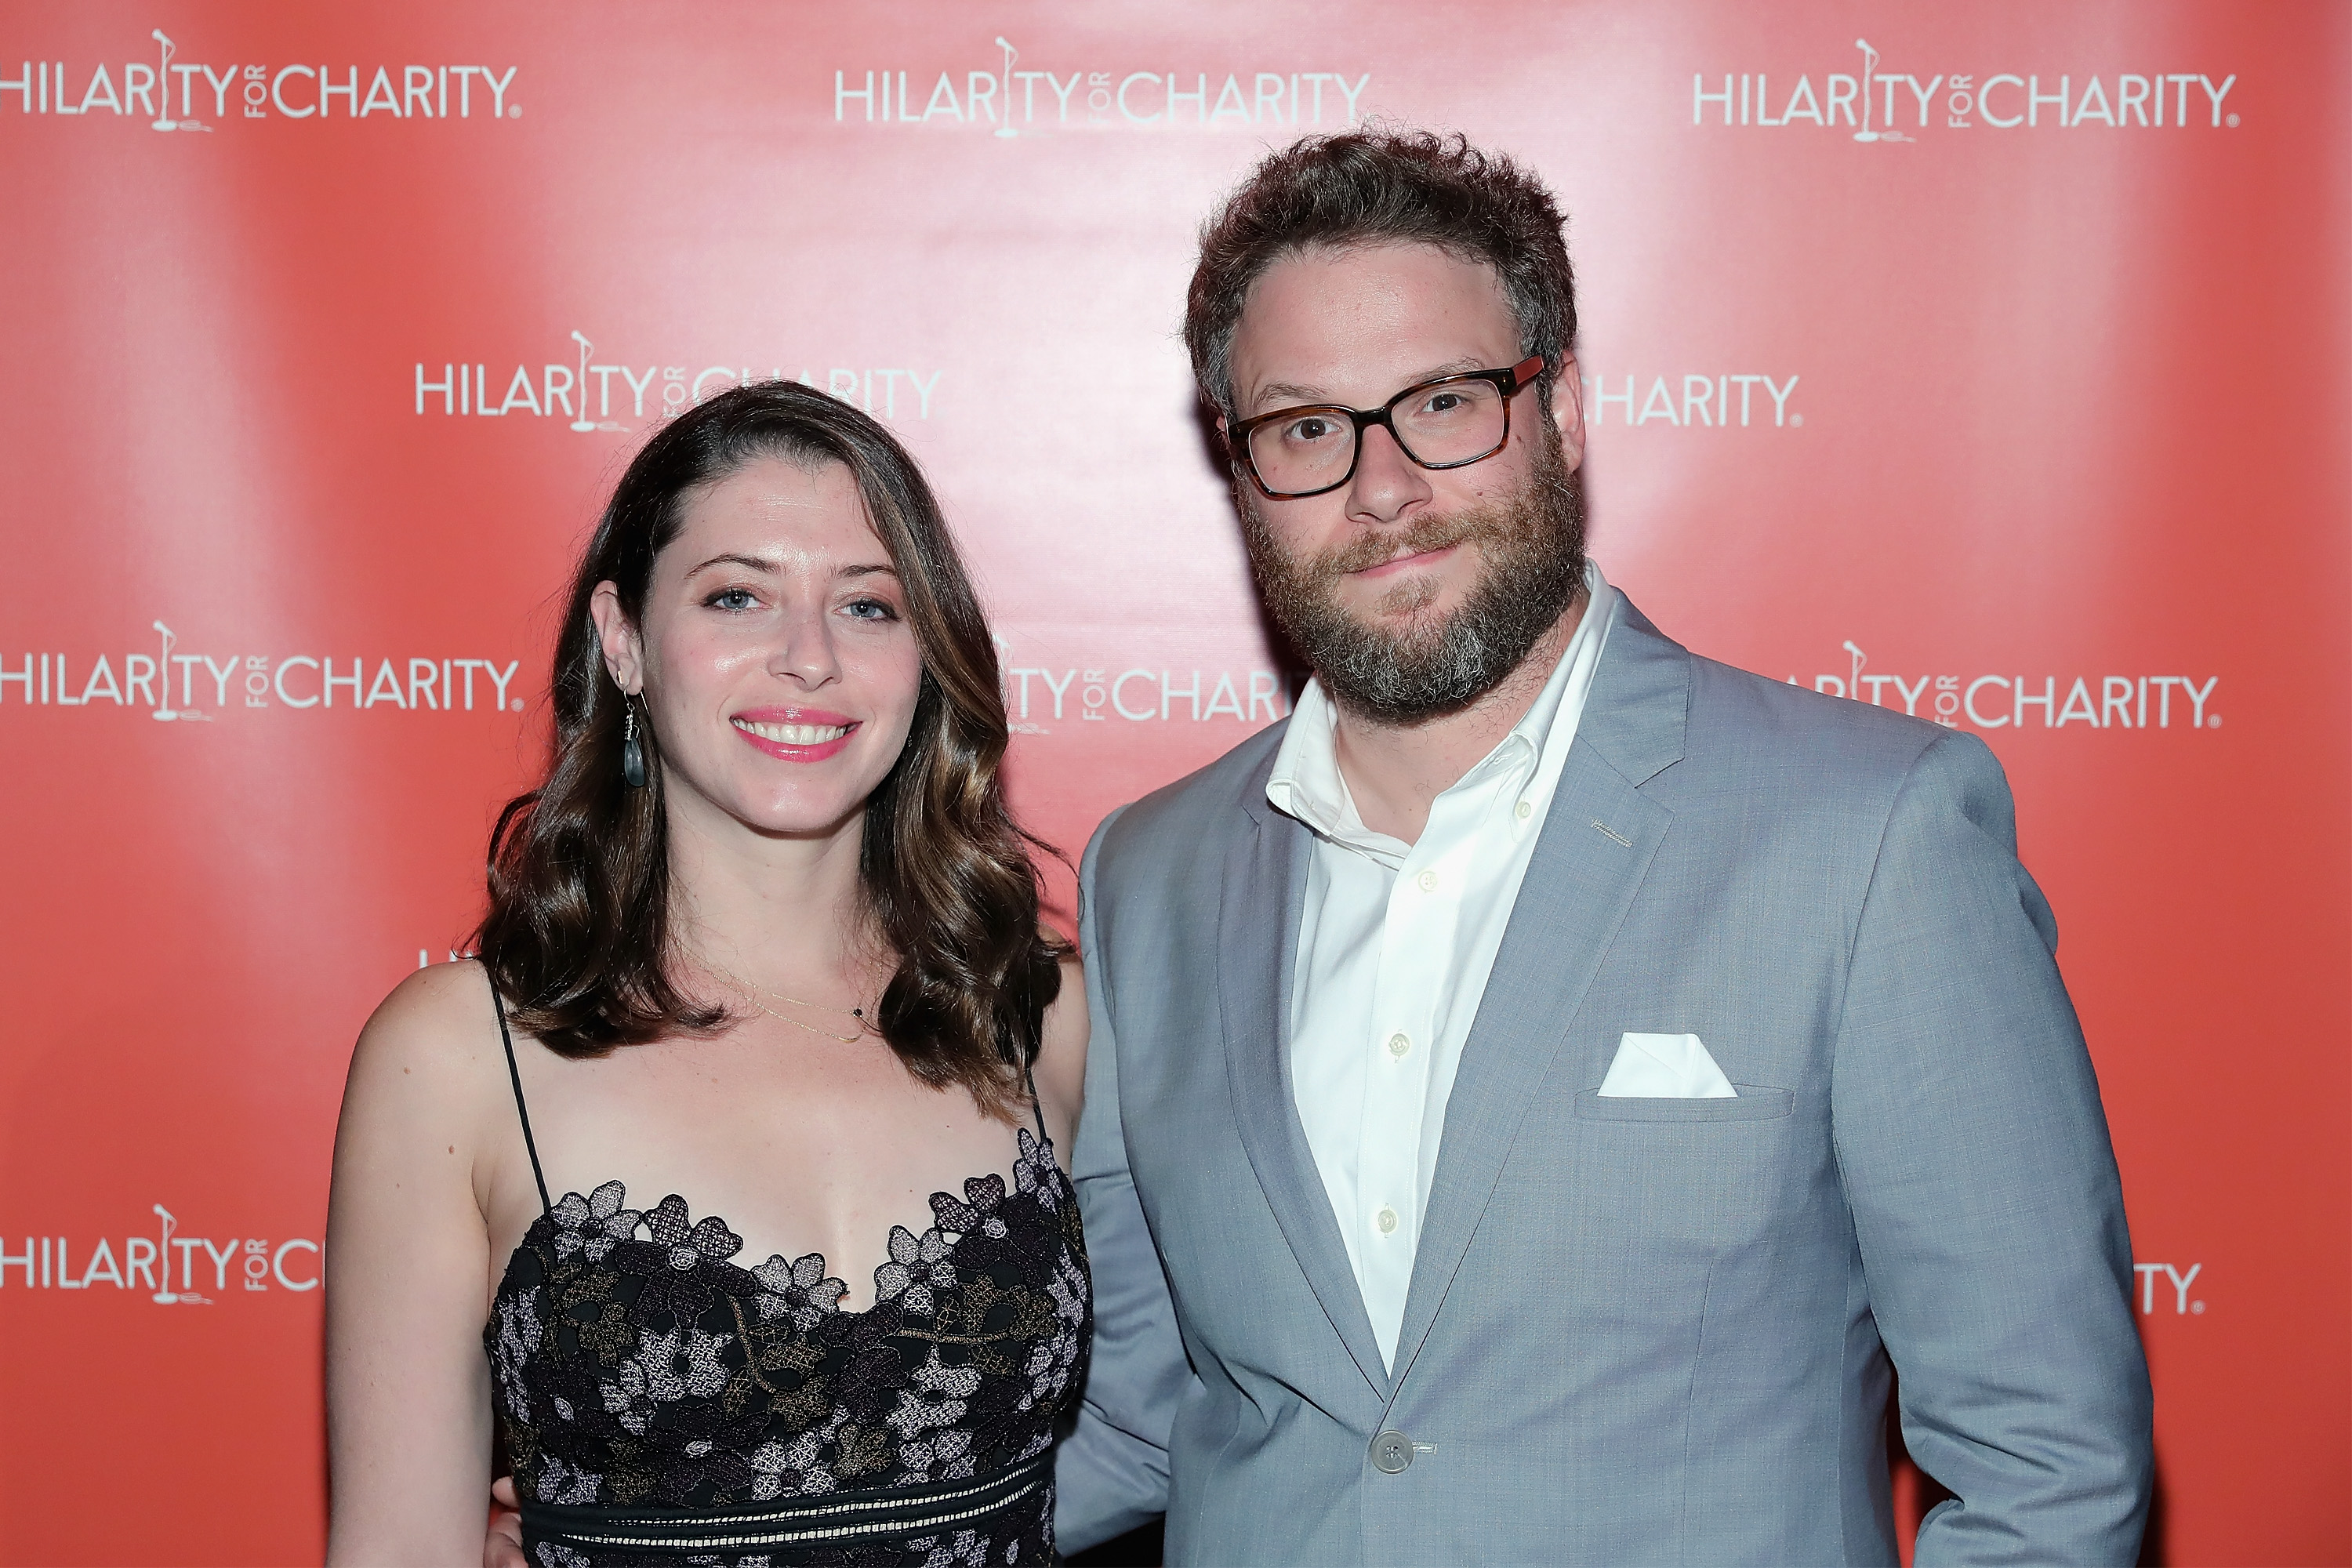 Actors Lauren Miller (L) and Seth Rogen attend HFC NYC presented by Hilarity for Charity at Highline Ballroom on June 29, 2016 in New York City. (Neilson Barnard—Getty Images for Hilarity For Charity)